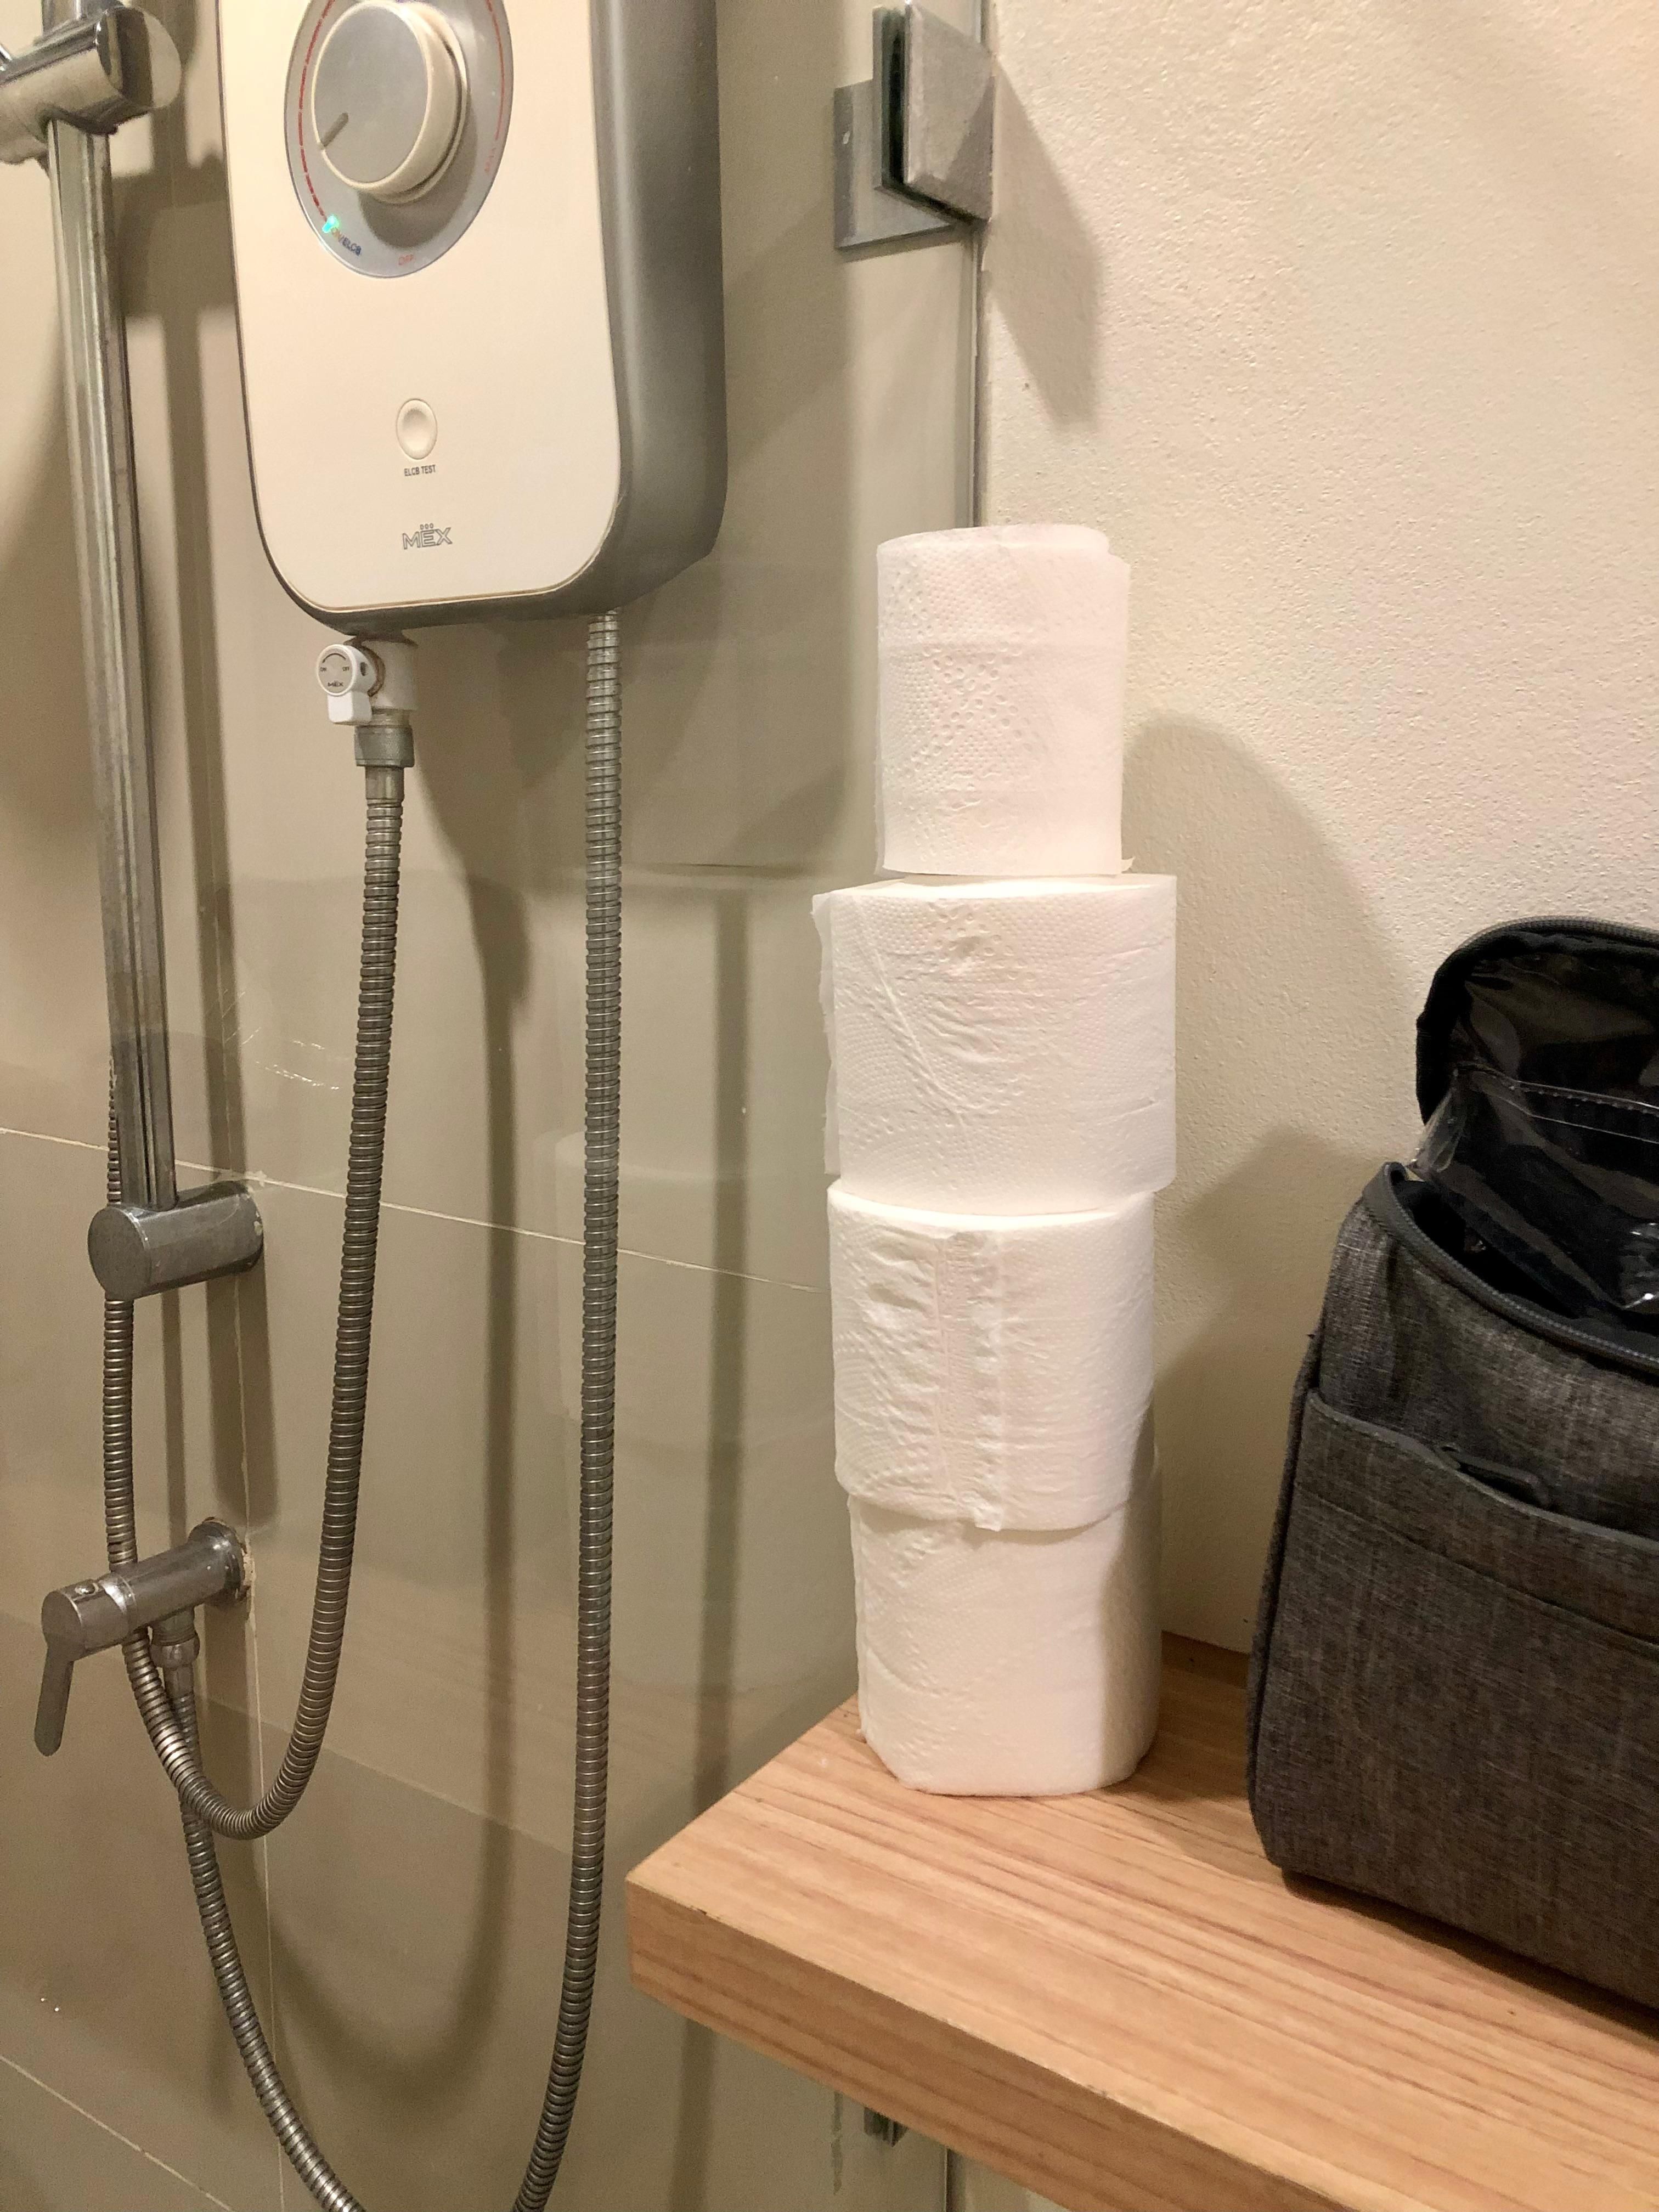 The hotel I’m staying in keeps adding a new roll of toilet paper every day even though I’m not using any.